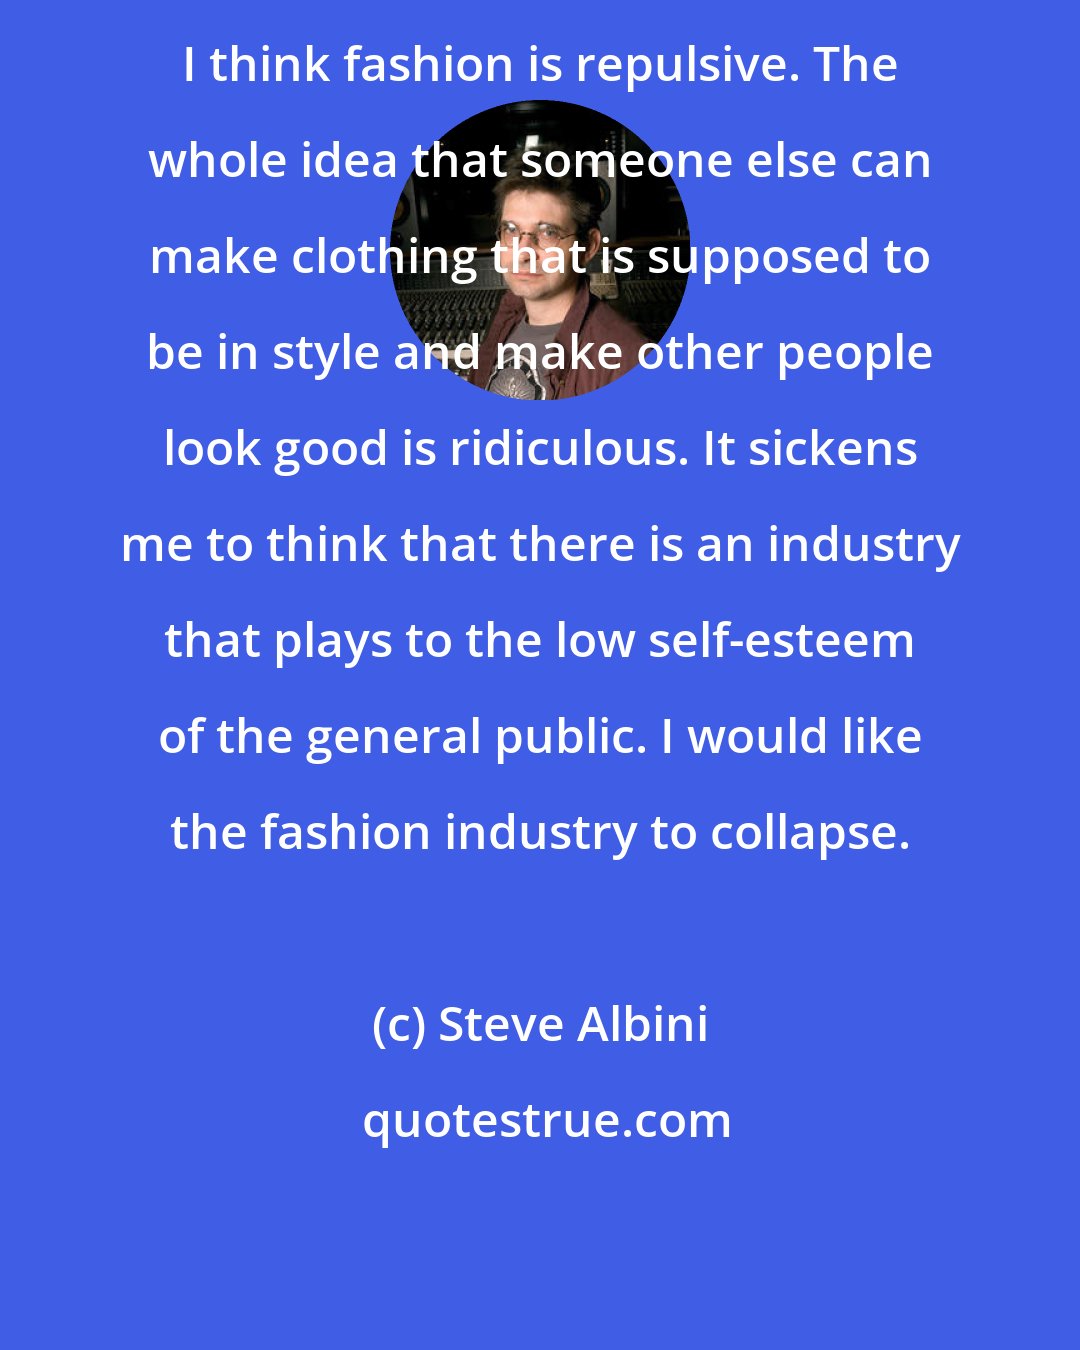 Steve Albini: I think fashion is repulsive. The whole idea that someone else can make clothing that is supposed to be in style and make other people look good is ridiculous. It sickens me to think that there is an industry that plays to the low self-esteem of the general public. I would like the fashion industry to collapse.